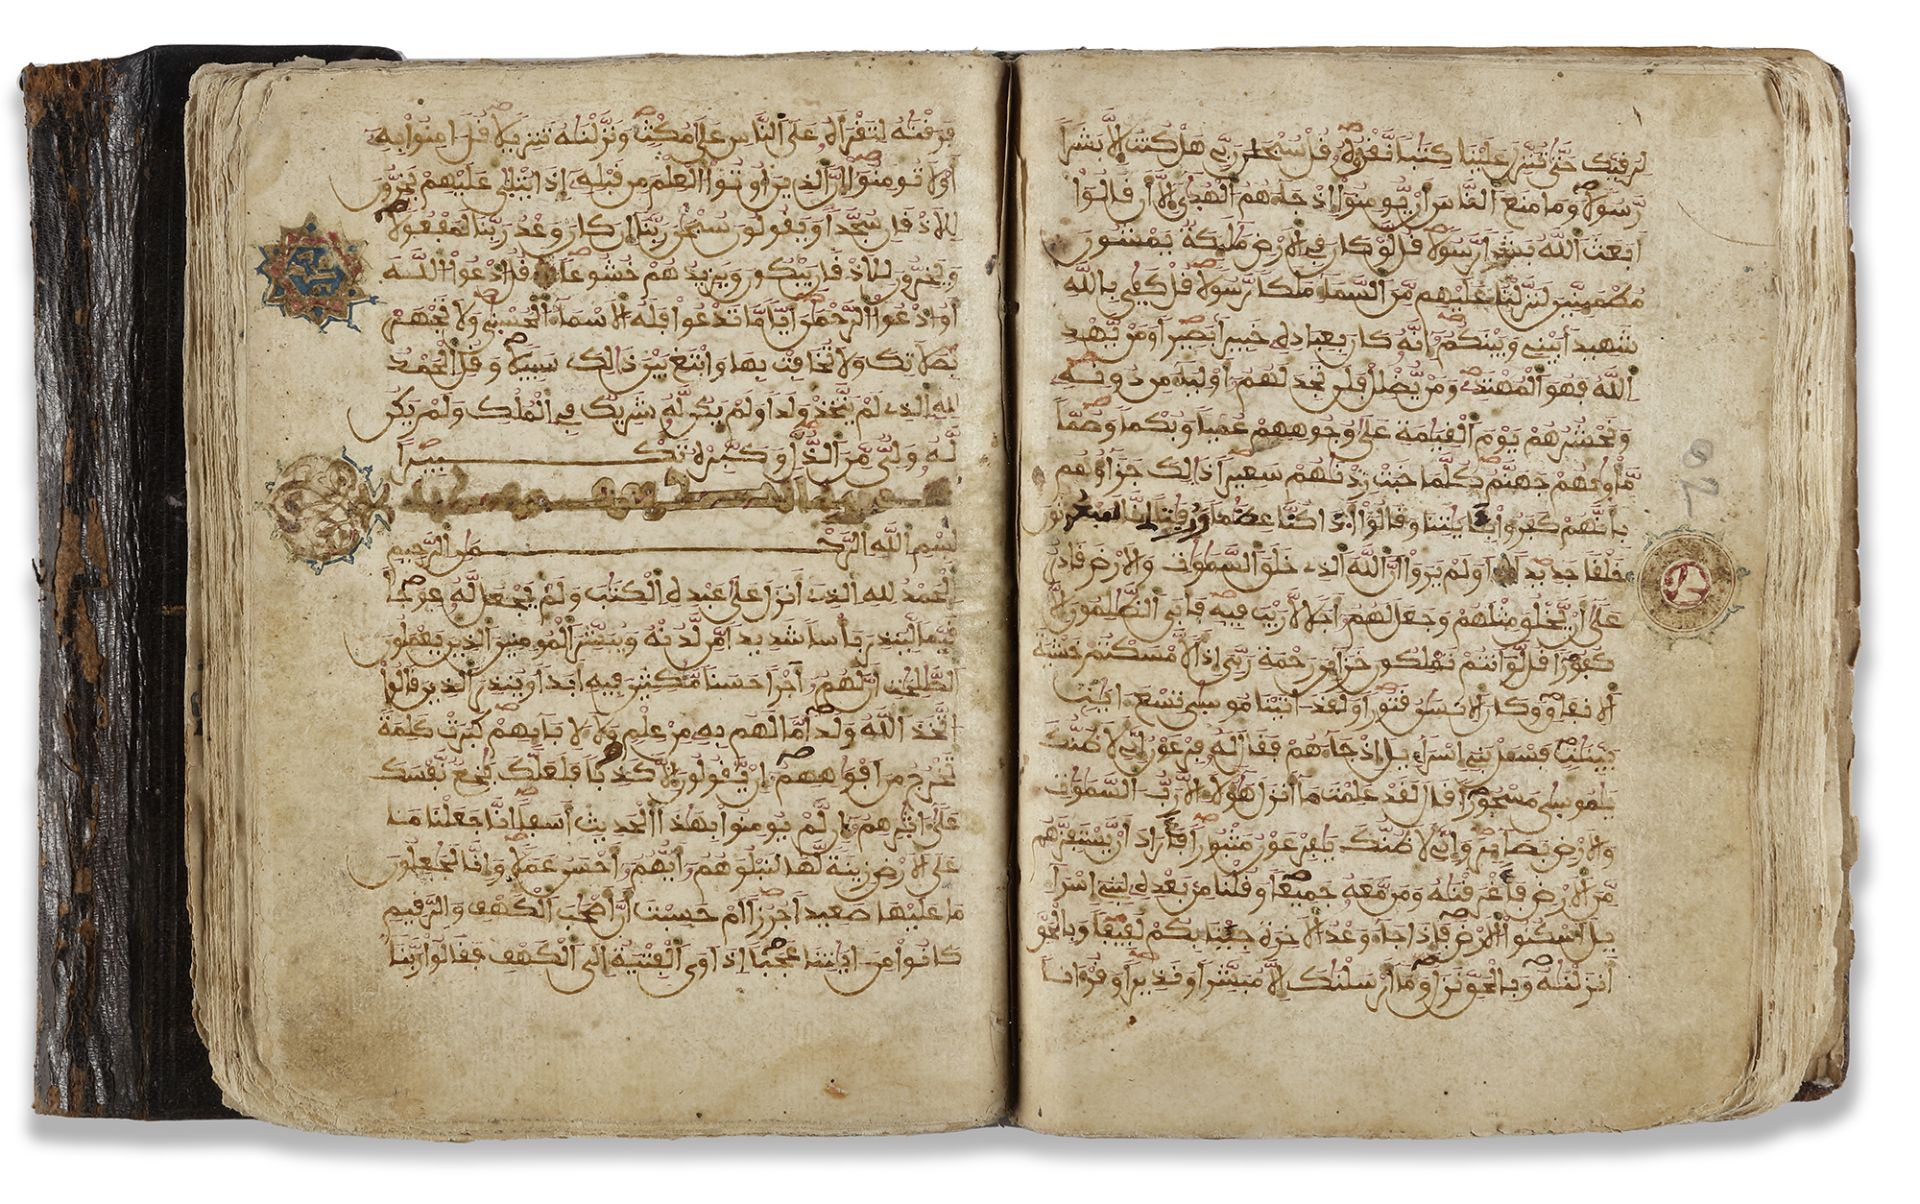 A QURAN IN MAGHRIBI SCRIPT, NORTH AFRICA, DATED 1010 AH/1601 AD - Image 5 of 7